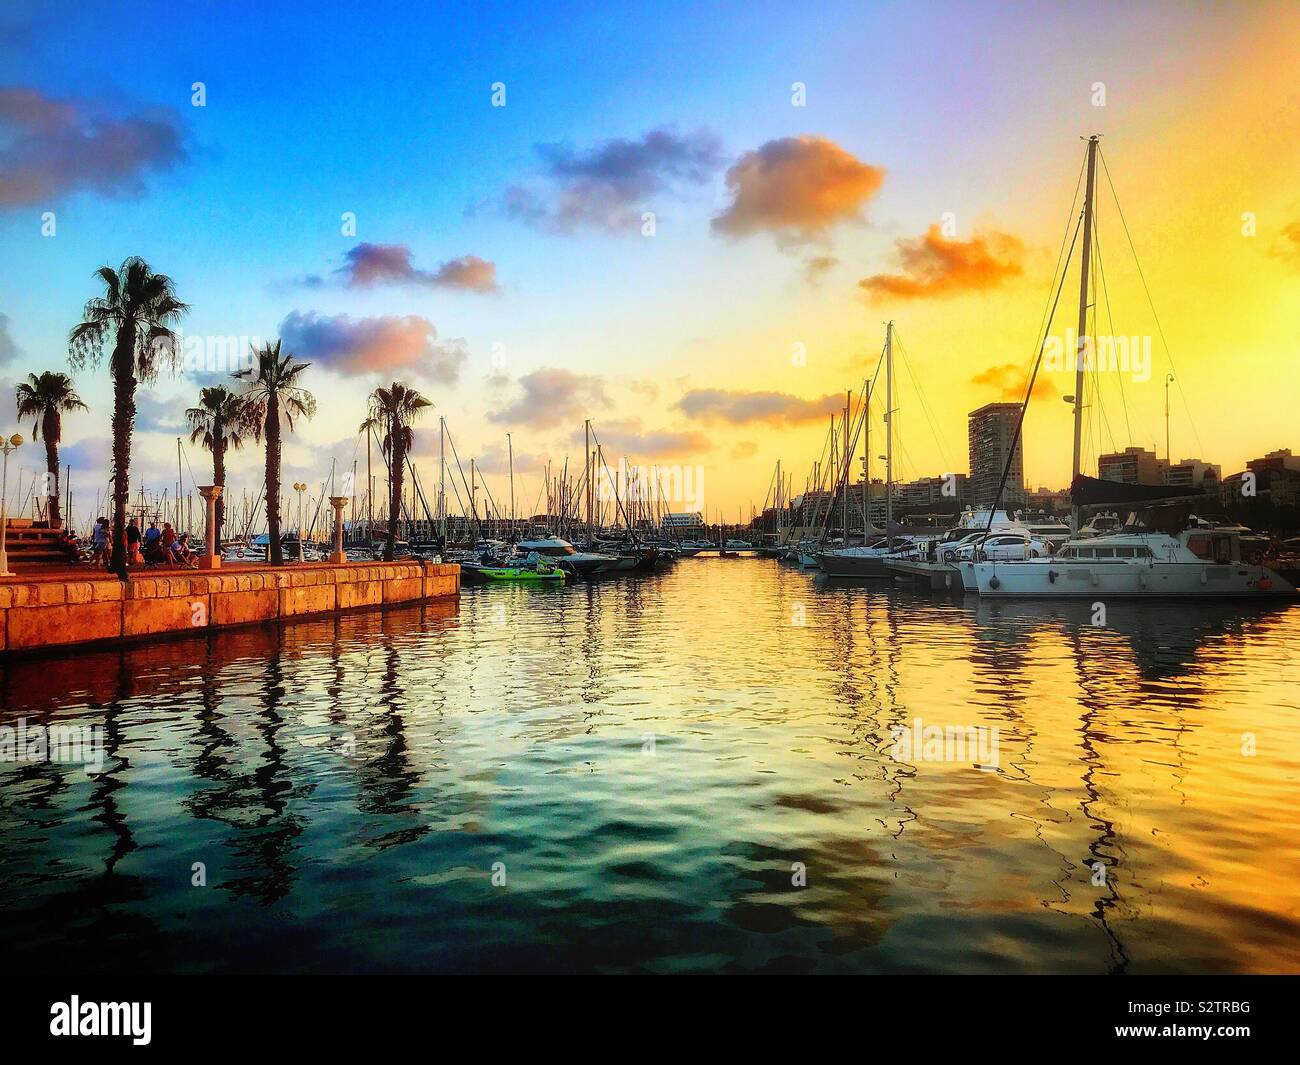 The port of Alicante is flanked with Palms and is a safe haven for hundreds of luxury yachts. At sunset on a summer’s day the sky is aglow with the gentle warmth of the Spanish sun. Stock Photo